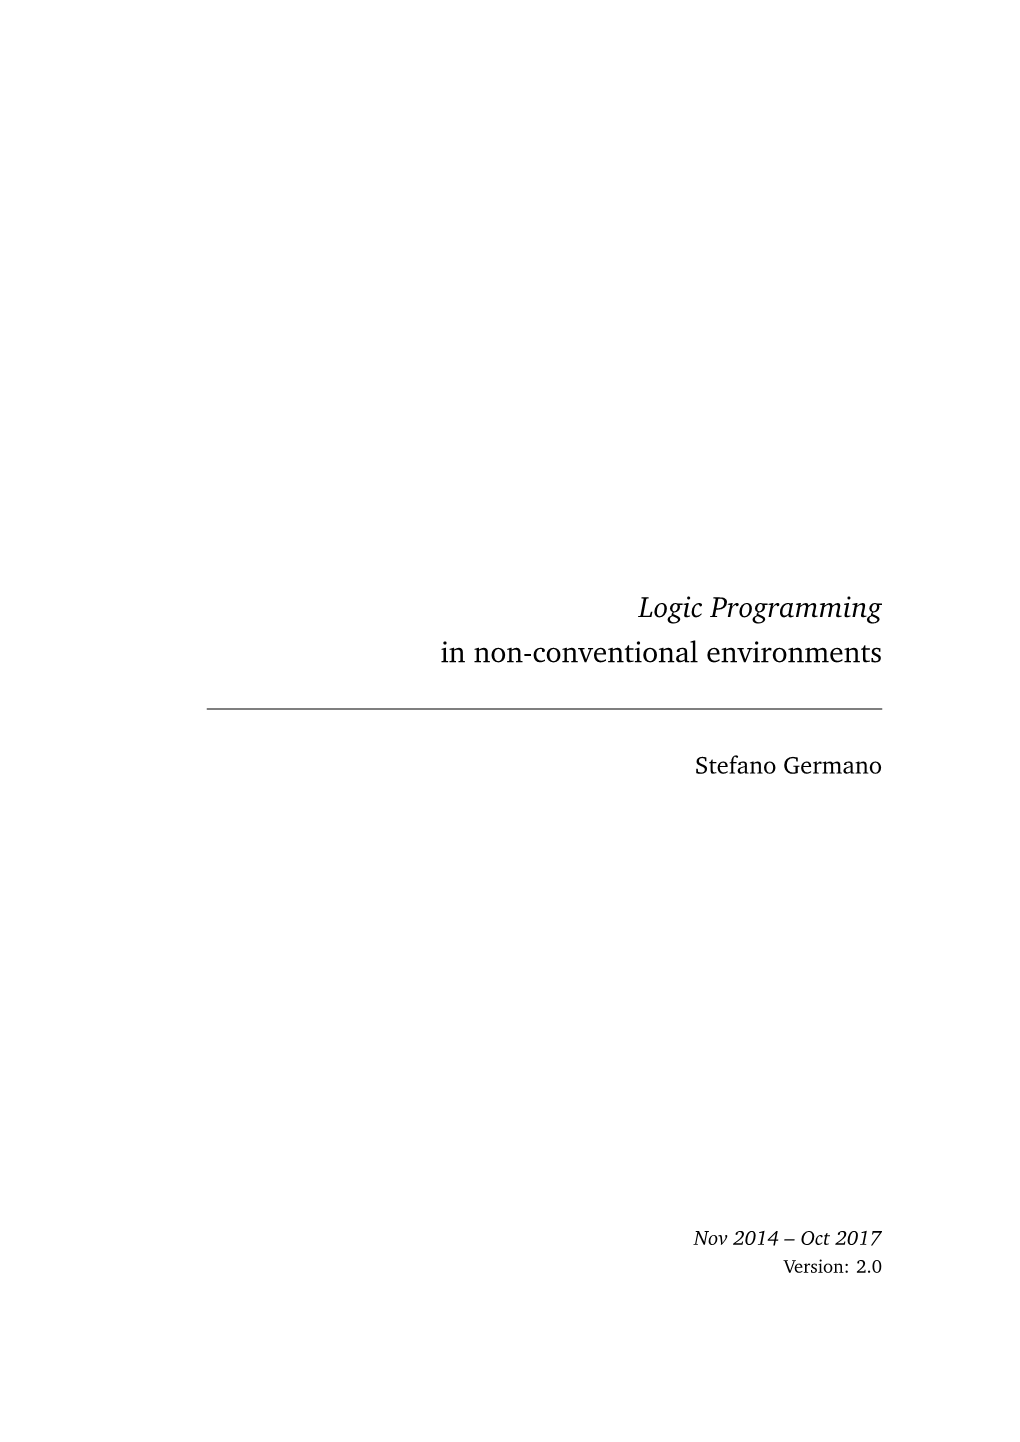 Logic Programming in Non-Conventional Environments